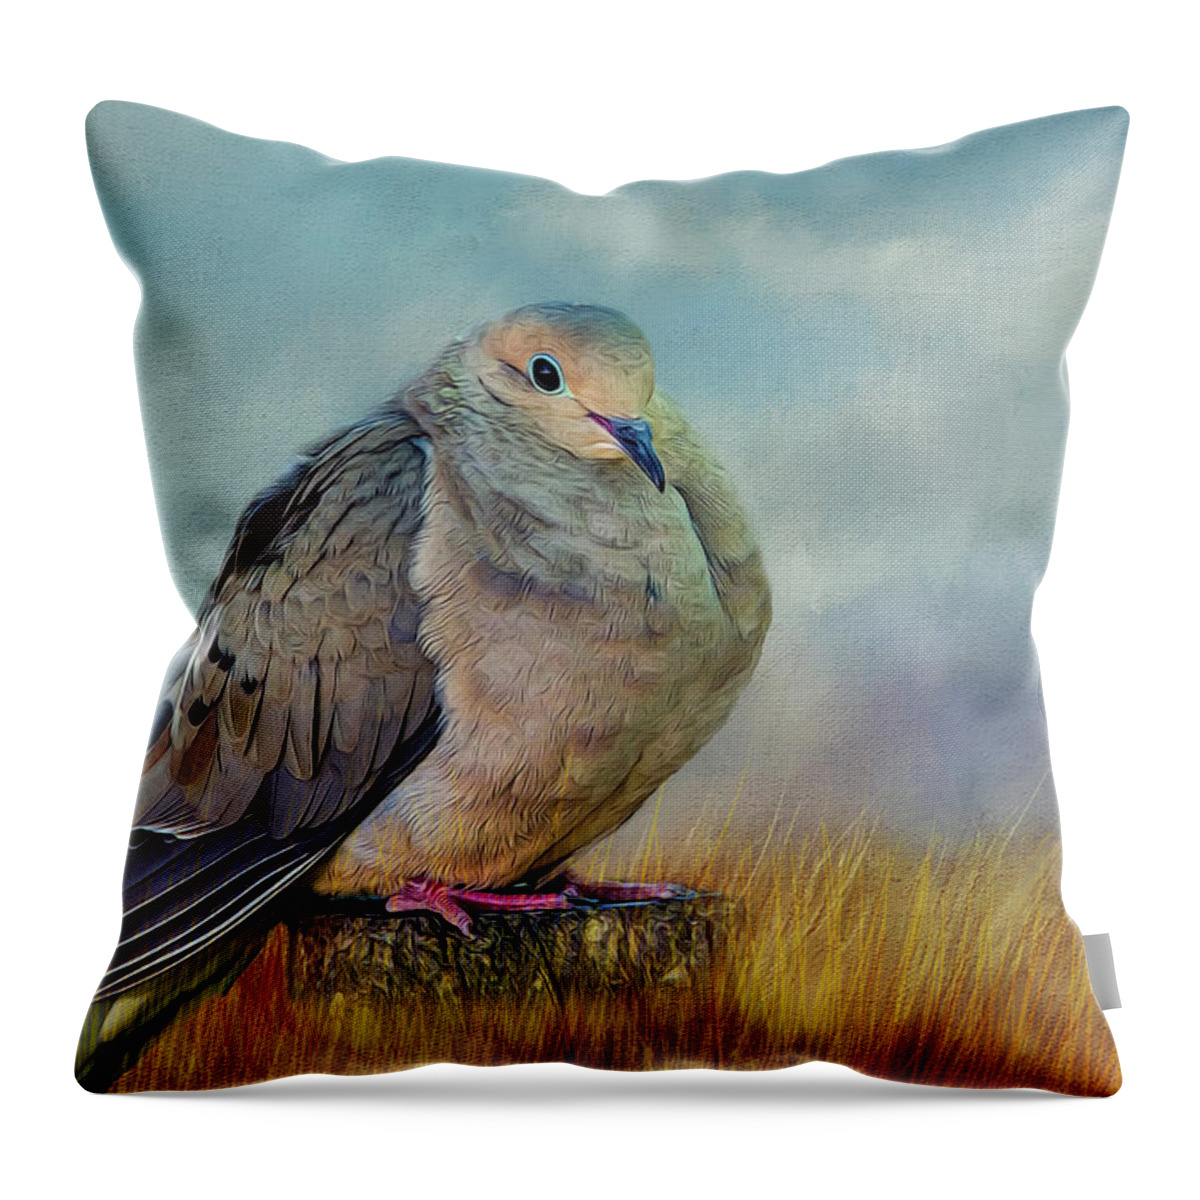 Dove Throw Pillow featuring the photograph Chubby Dove by Cathy Kovarik